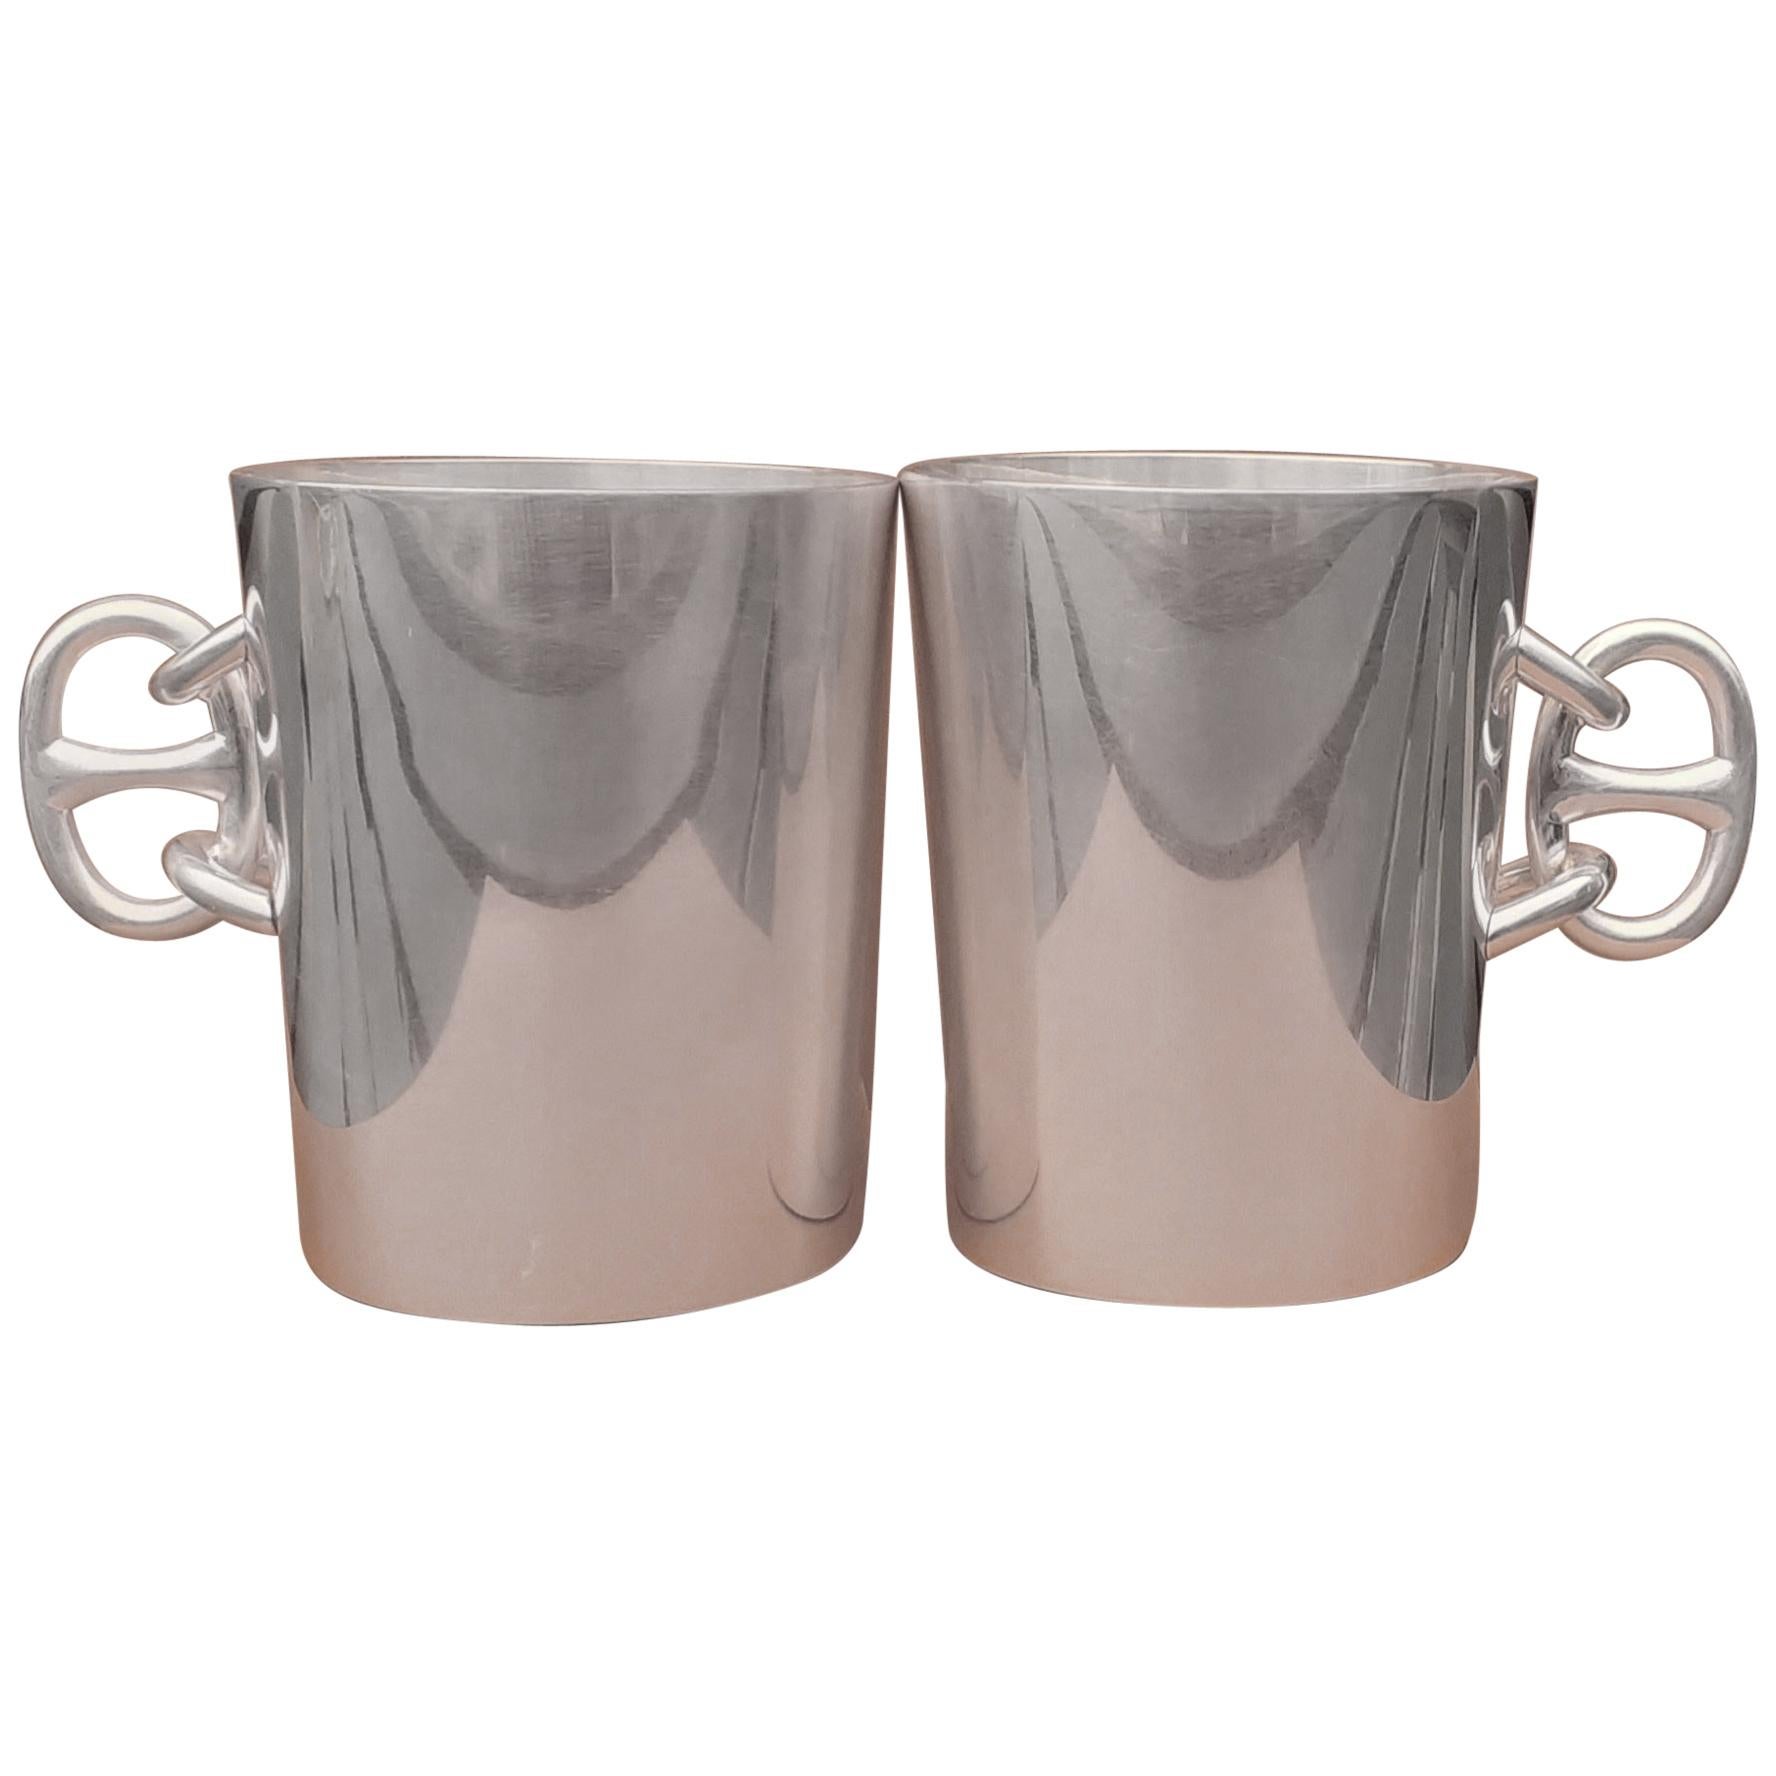 Hermès Set of 2 Silver-Tone Metal Cups Coffee Mugs Chaine d'Ancre Pattern RARE